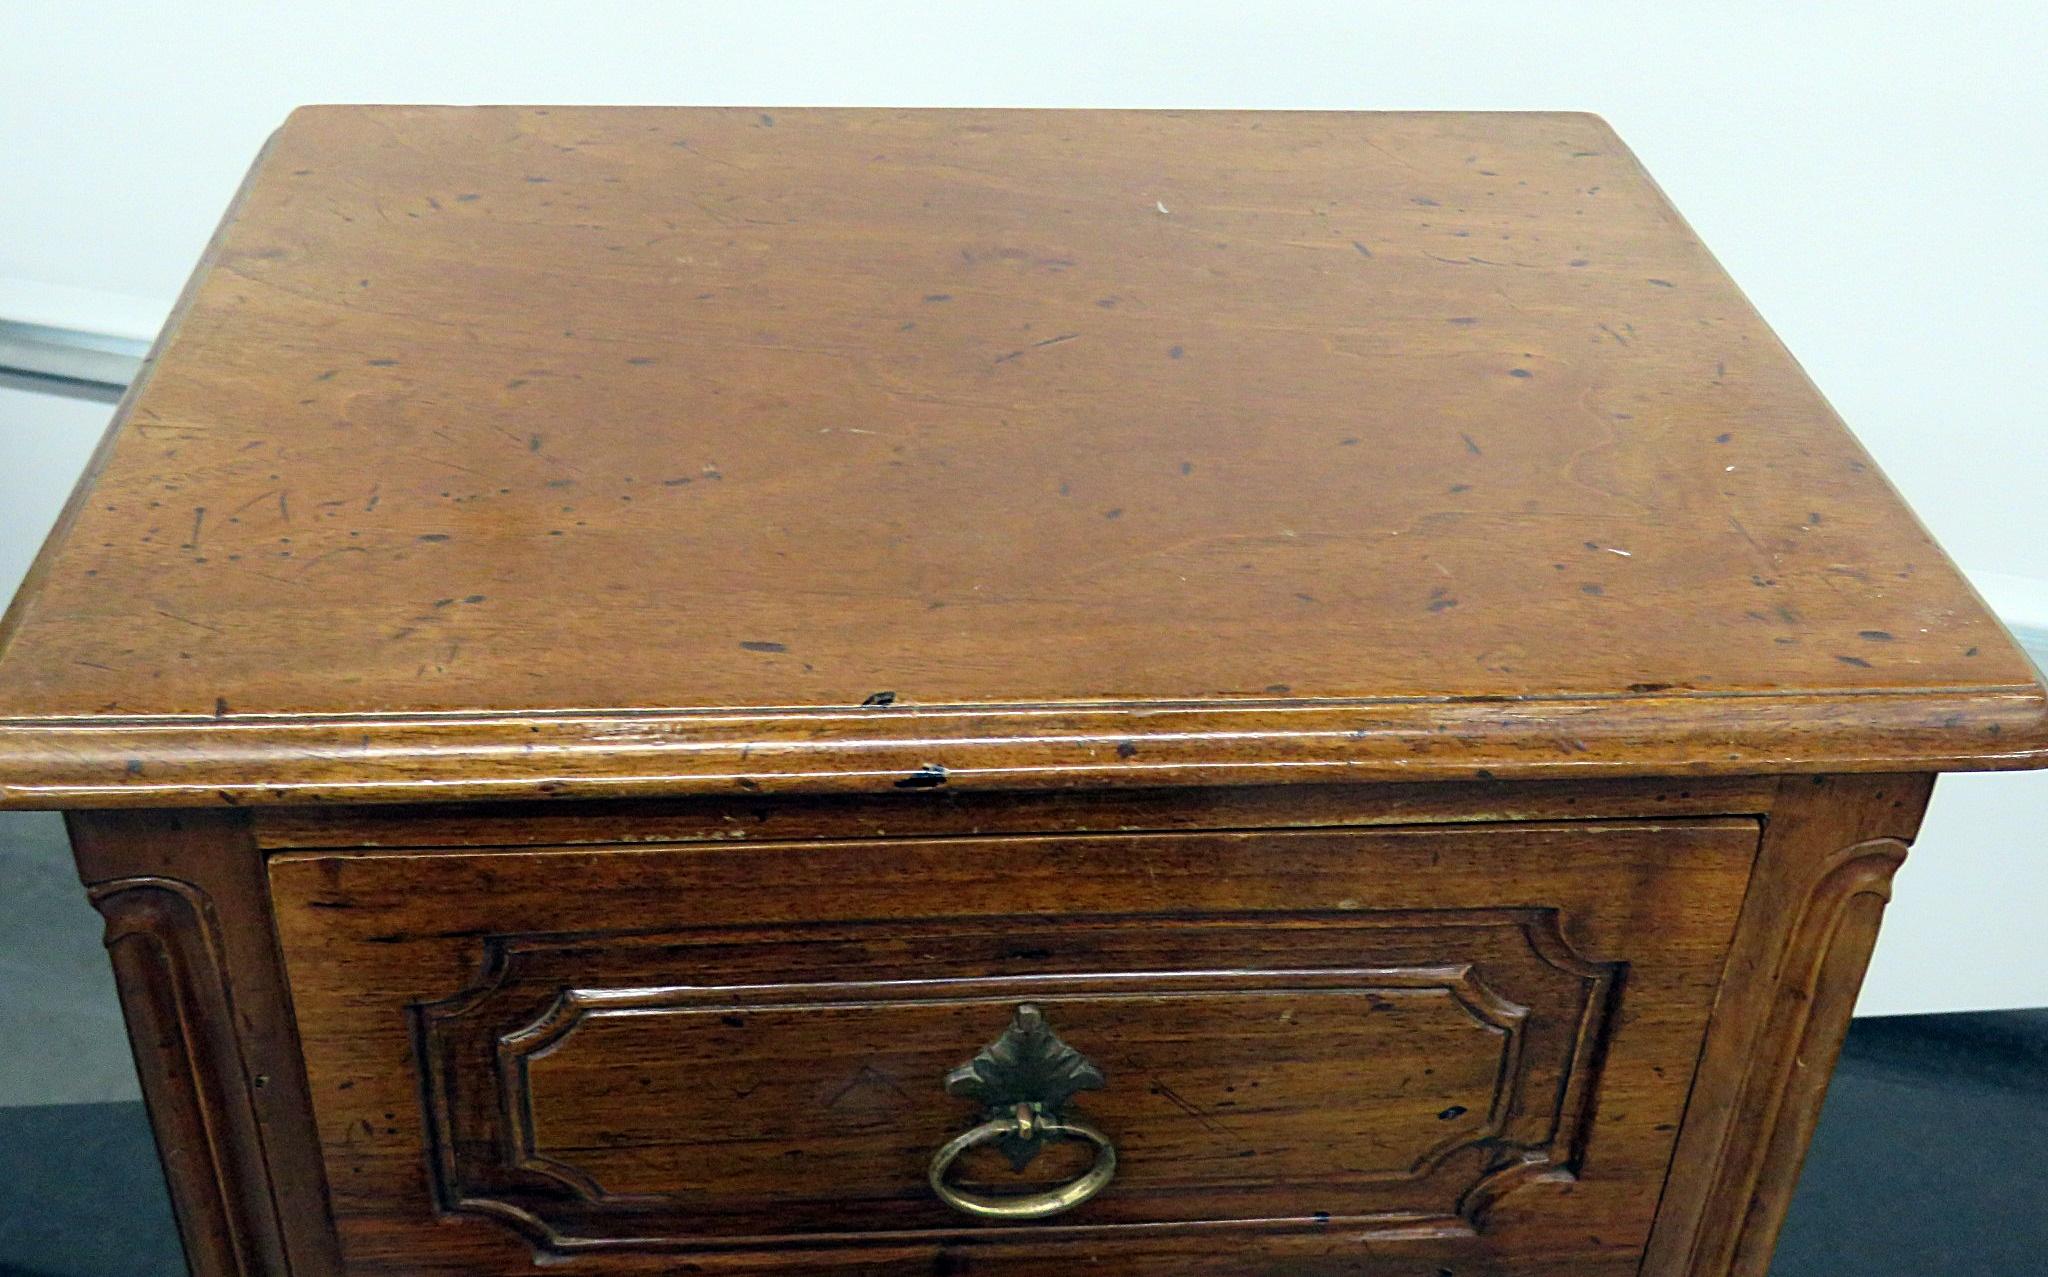 Louis XVI style 2 drawer petite commode with a distressed finish.